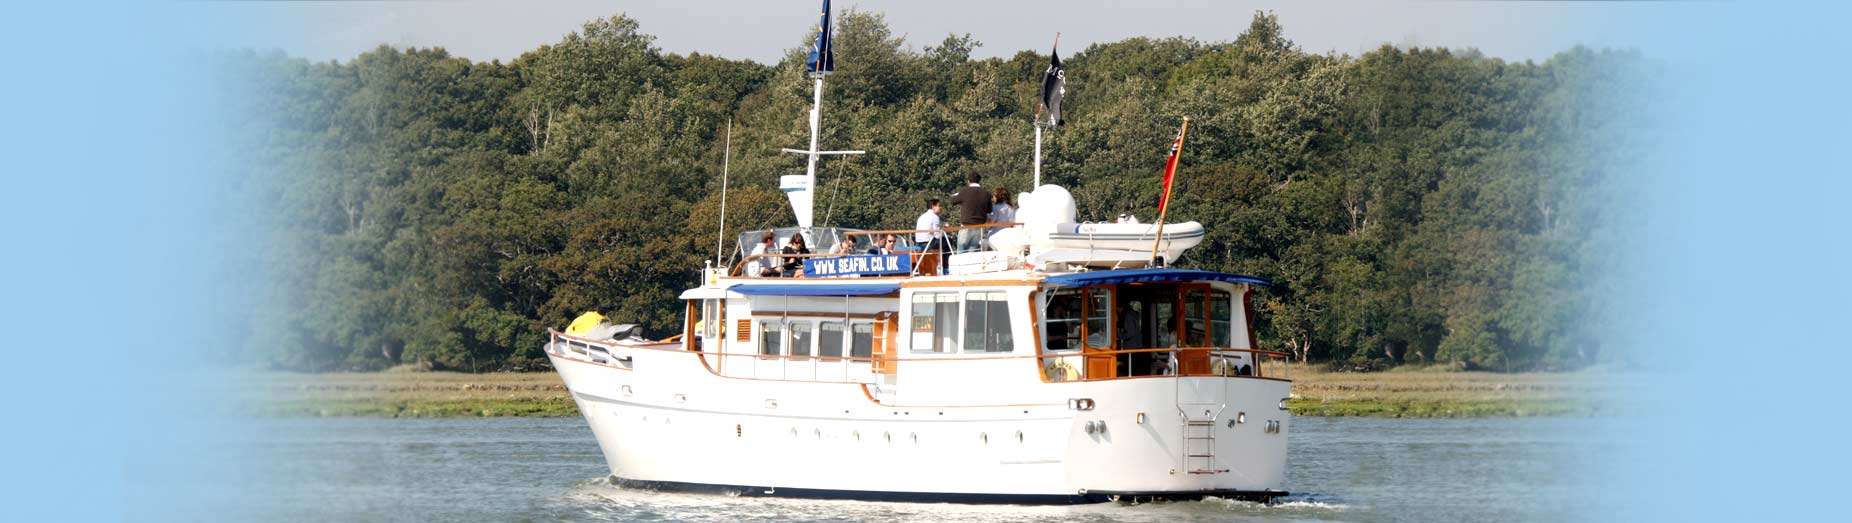 Seafin - Yacht Charter The Solent & Boat hire in United Kingdom England The Solent Southampton Southampton 2